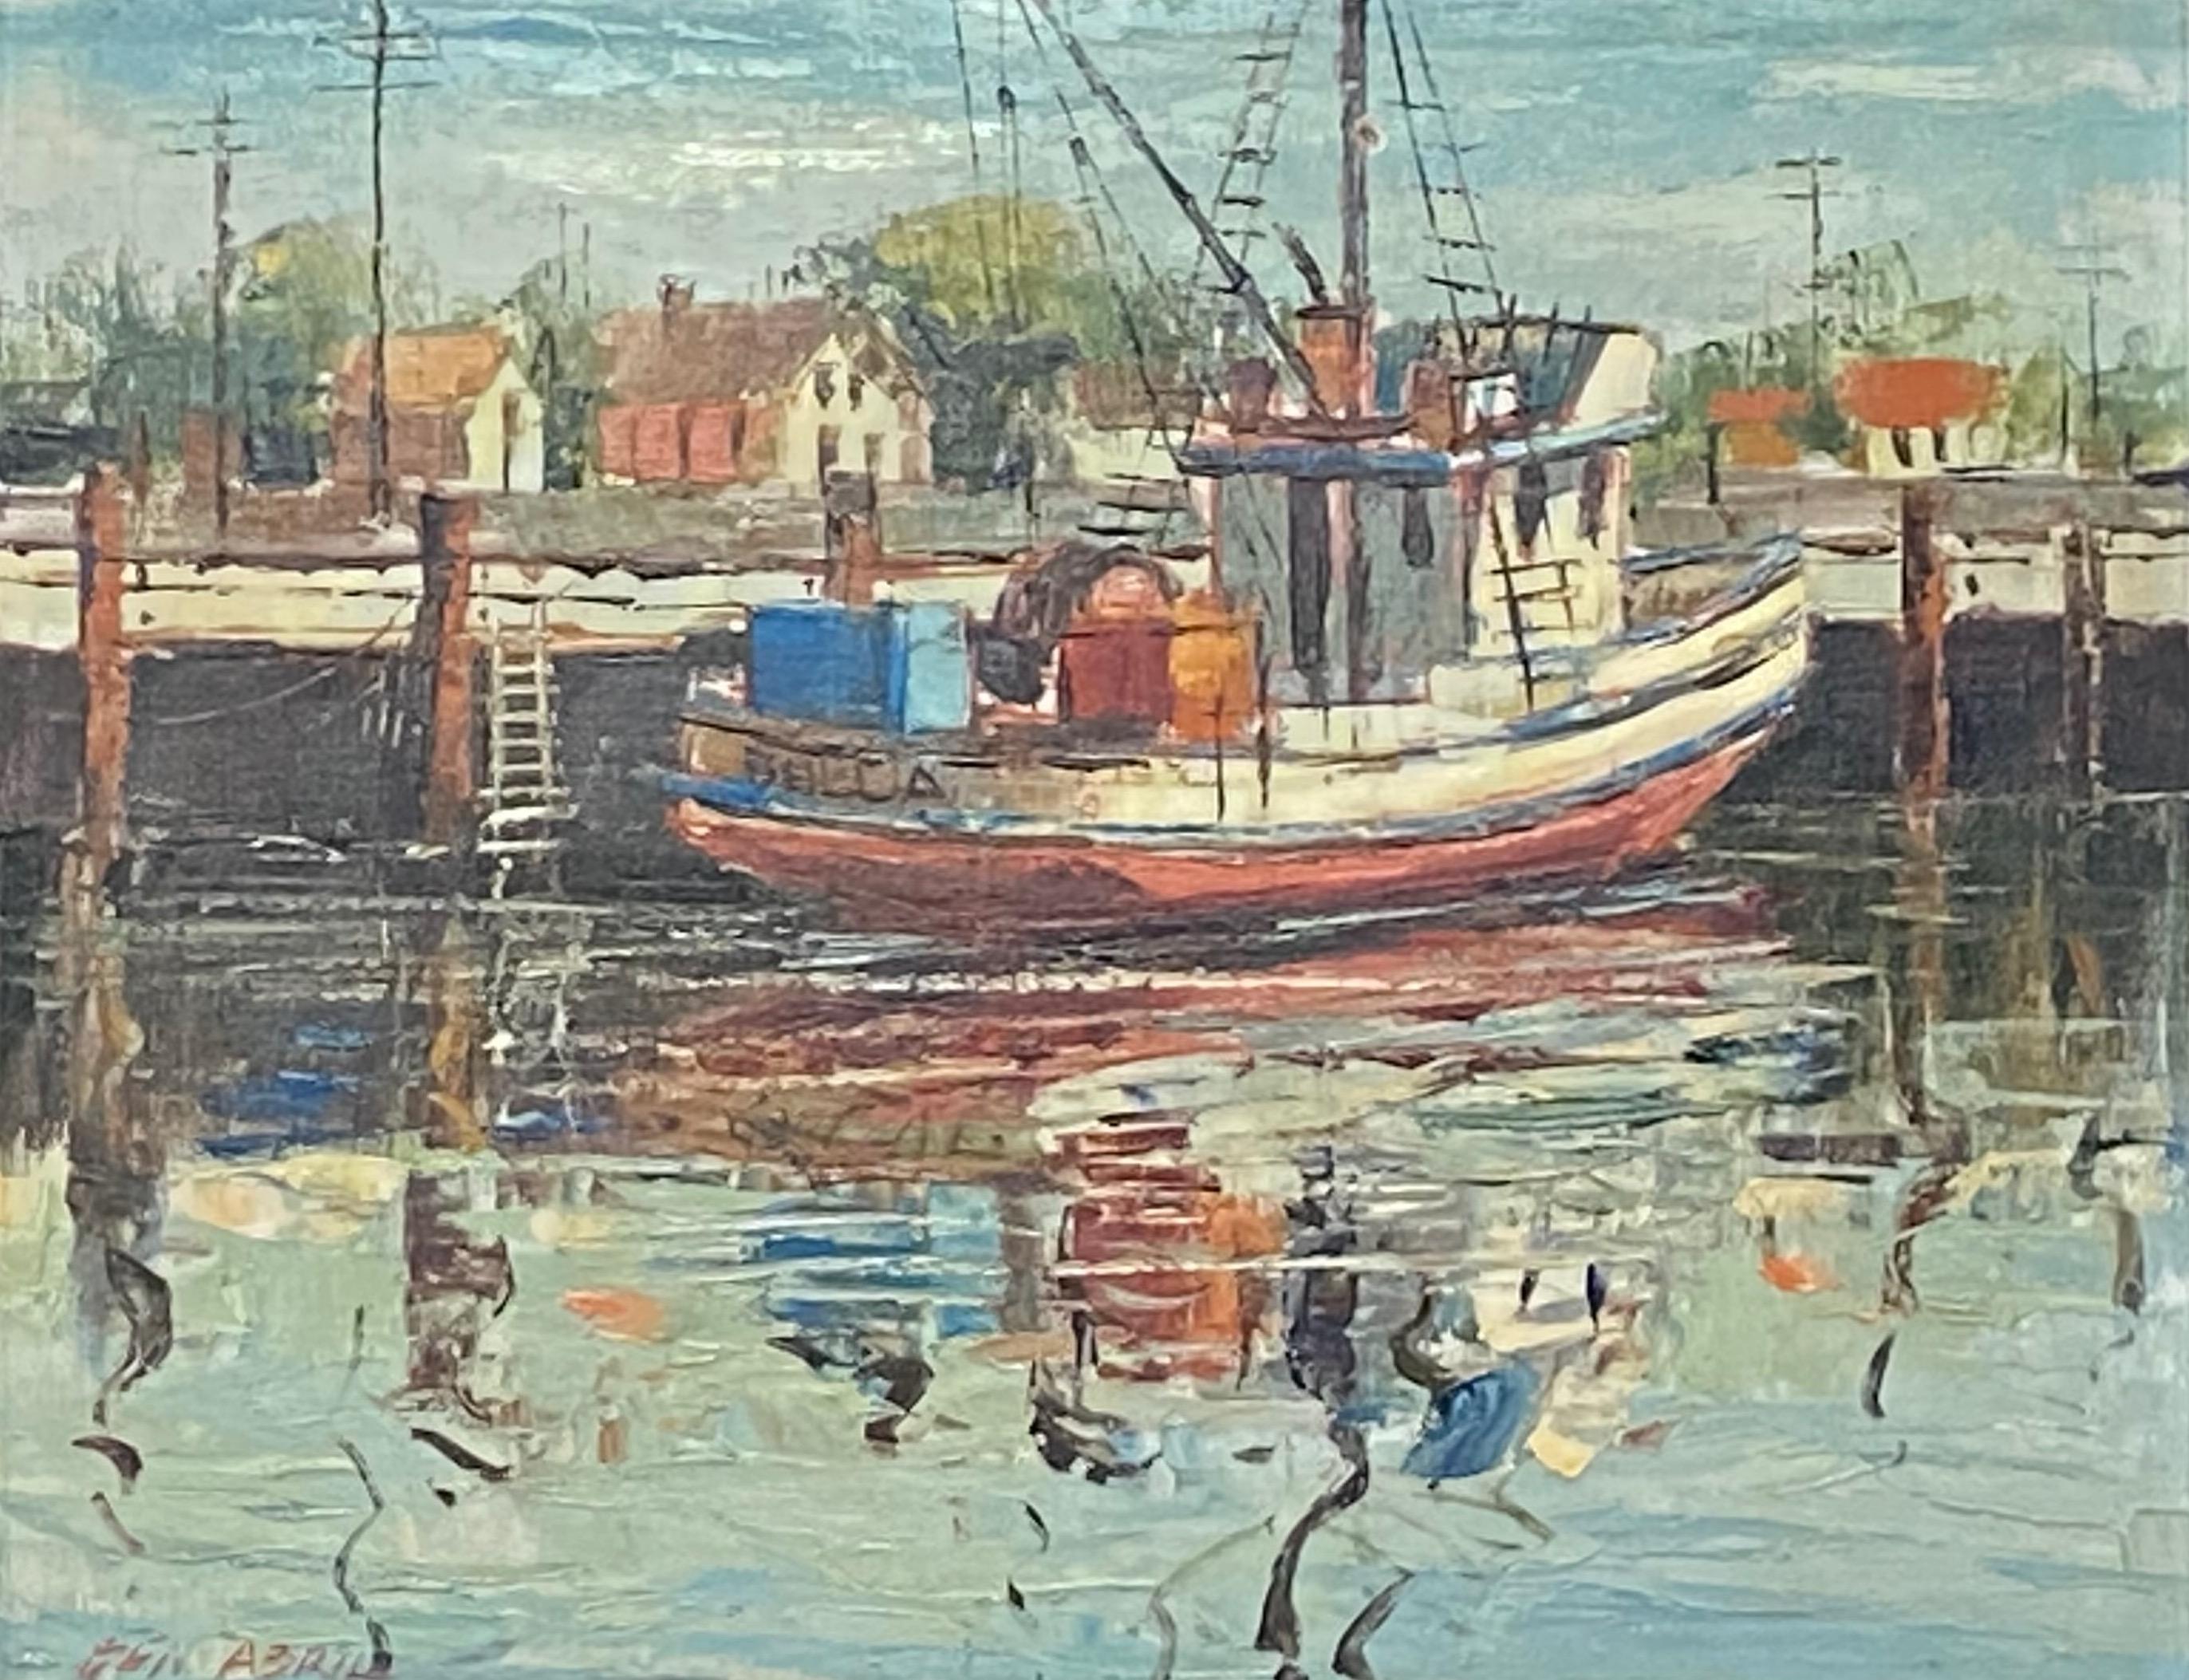 American Fishing Boat Scene Painting by California Artist Ben Abril, Mid-20th Century For Sale